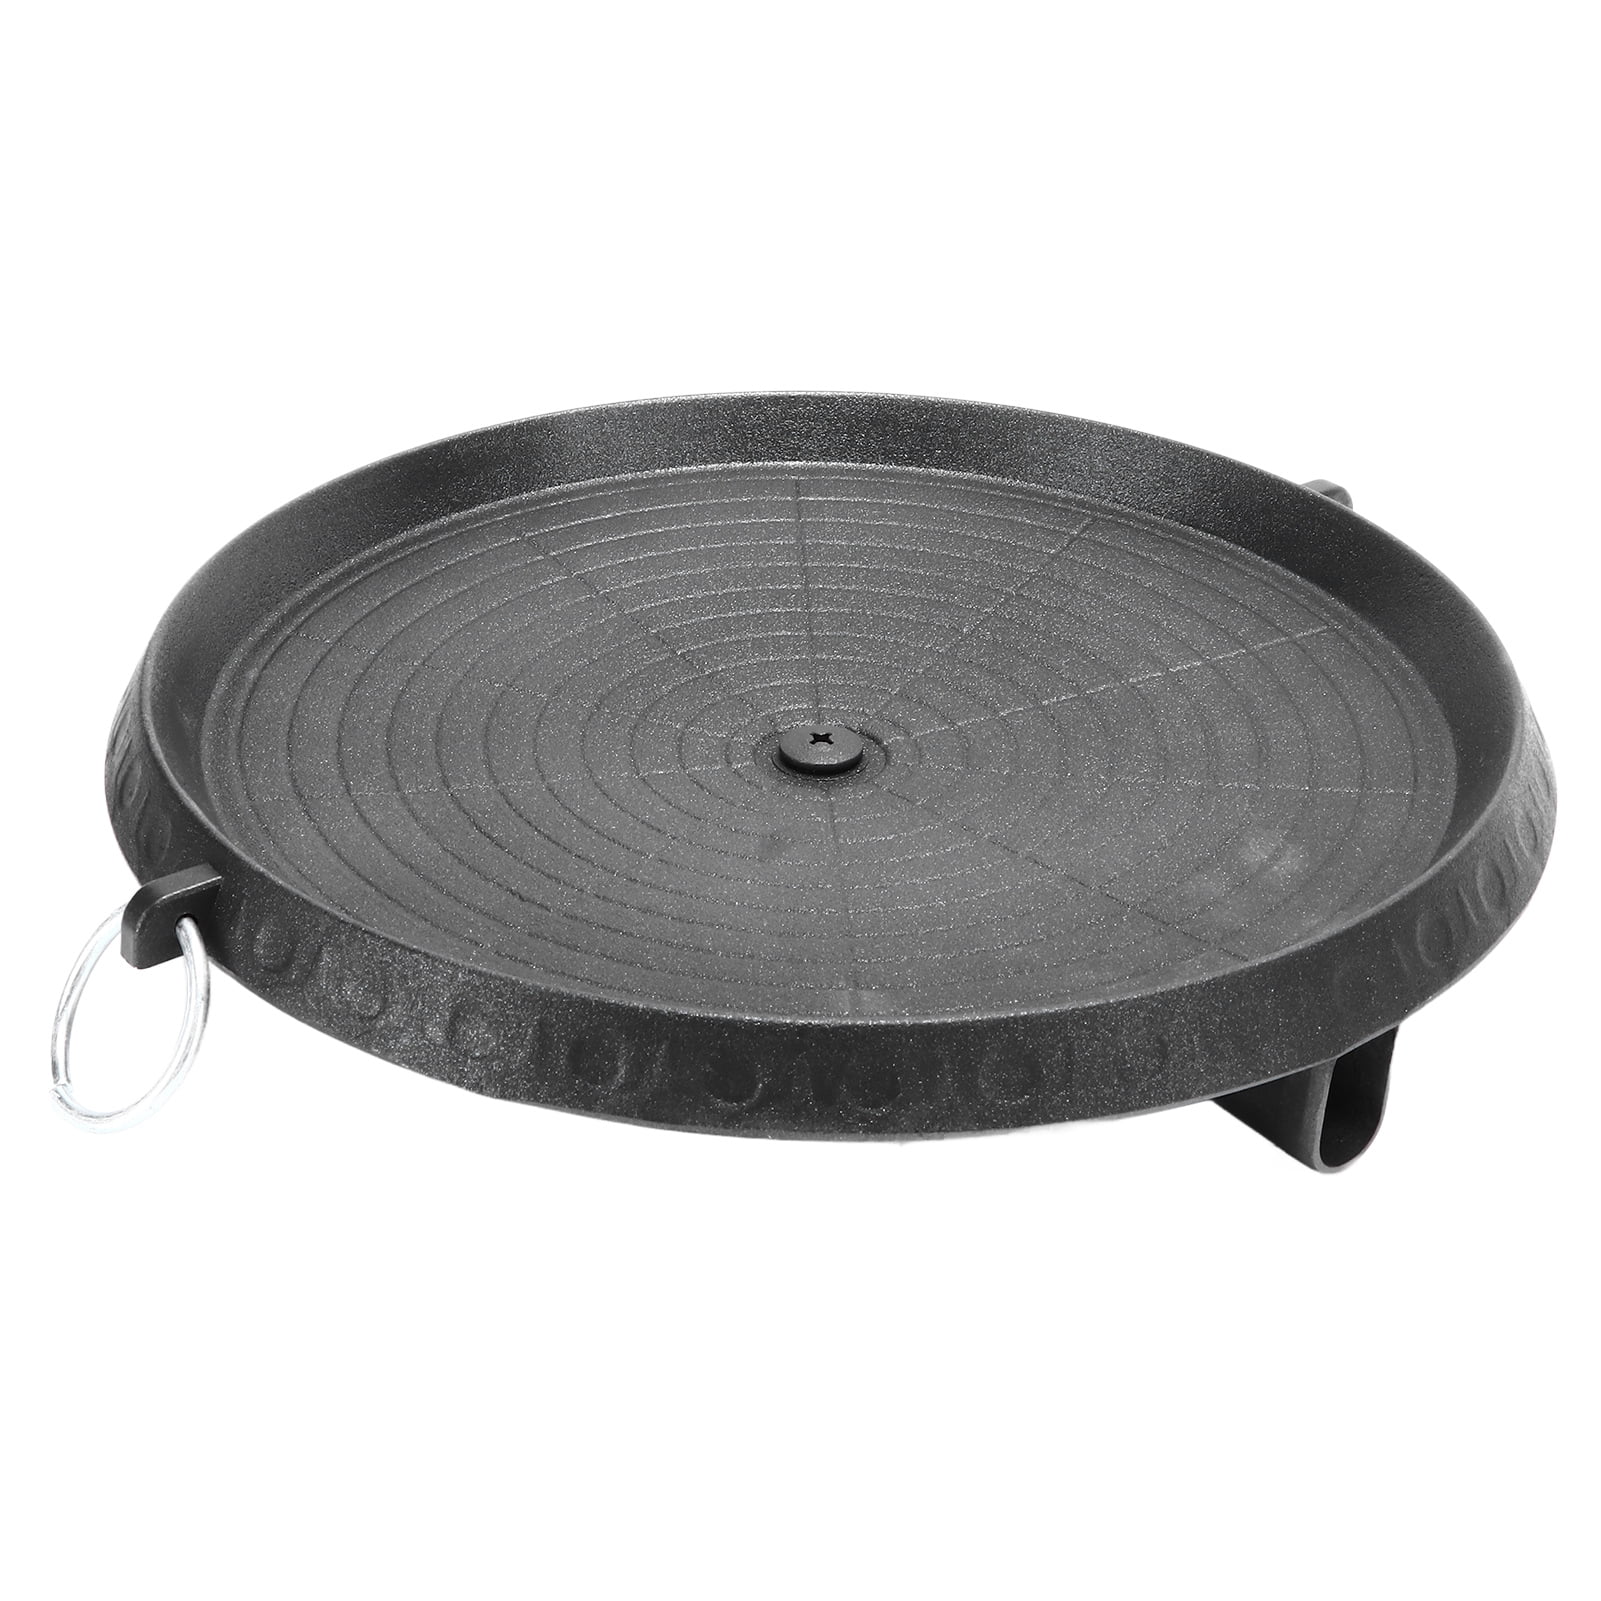 Portable BBQ Grill Stove Korean Coating Marble Gas Non Stick Pan Plate F4 